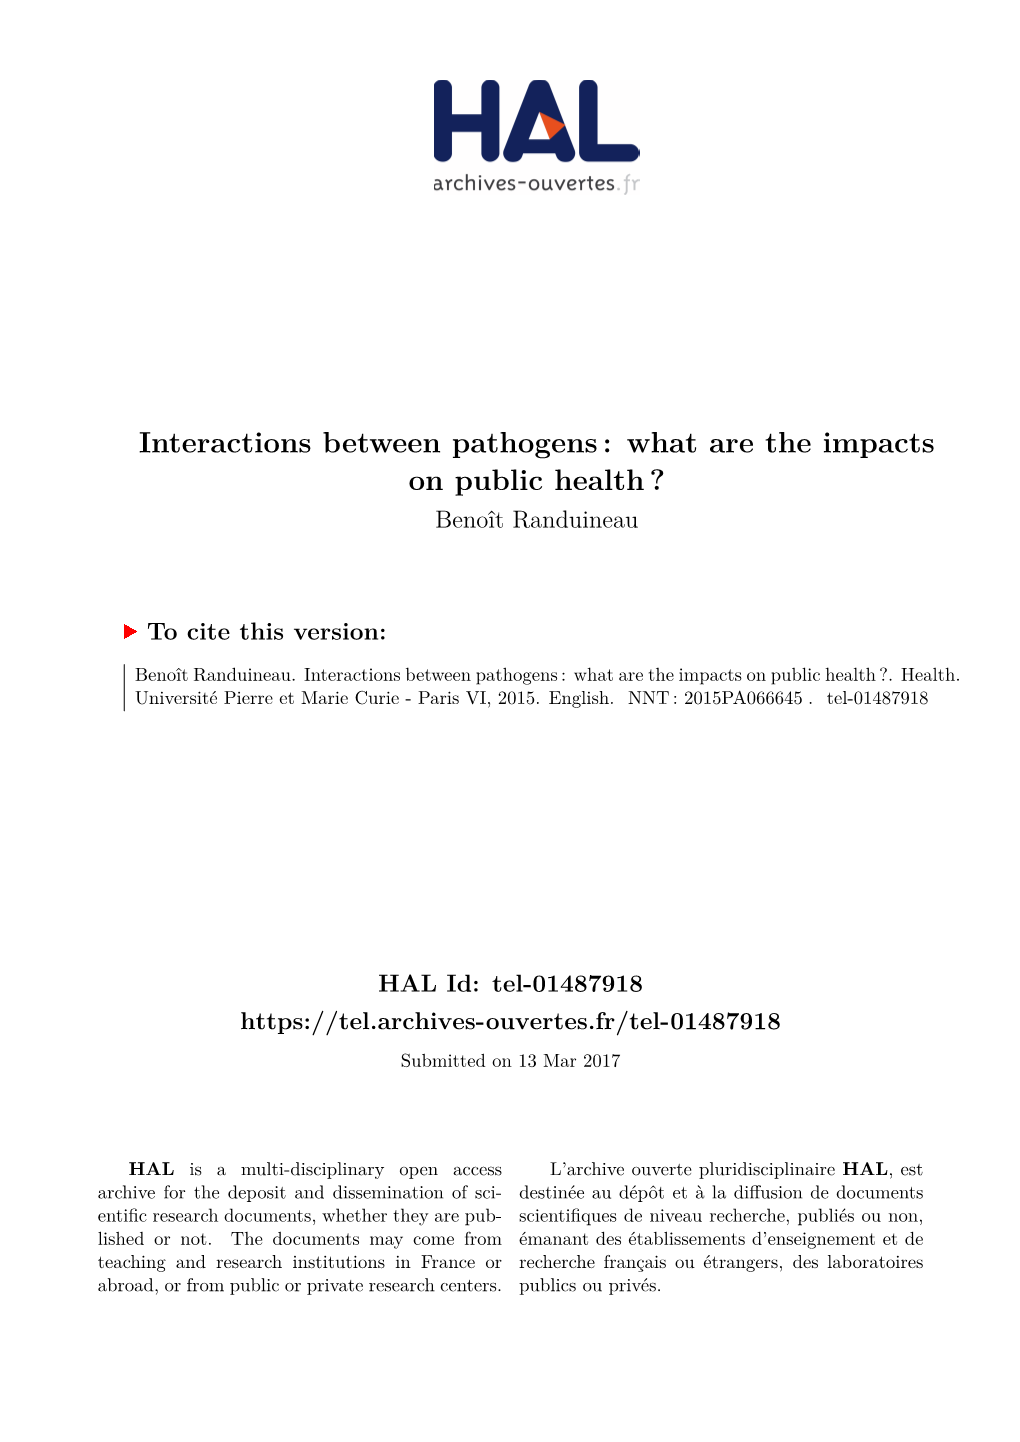 Interactions Between Pathogens: What Are the Impacts on Public Health?